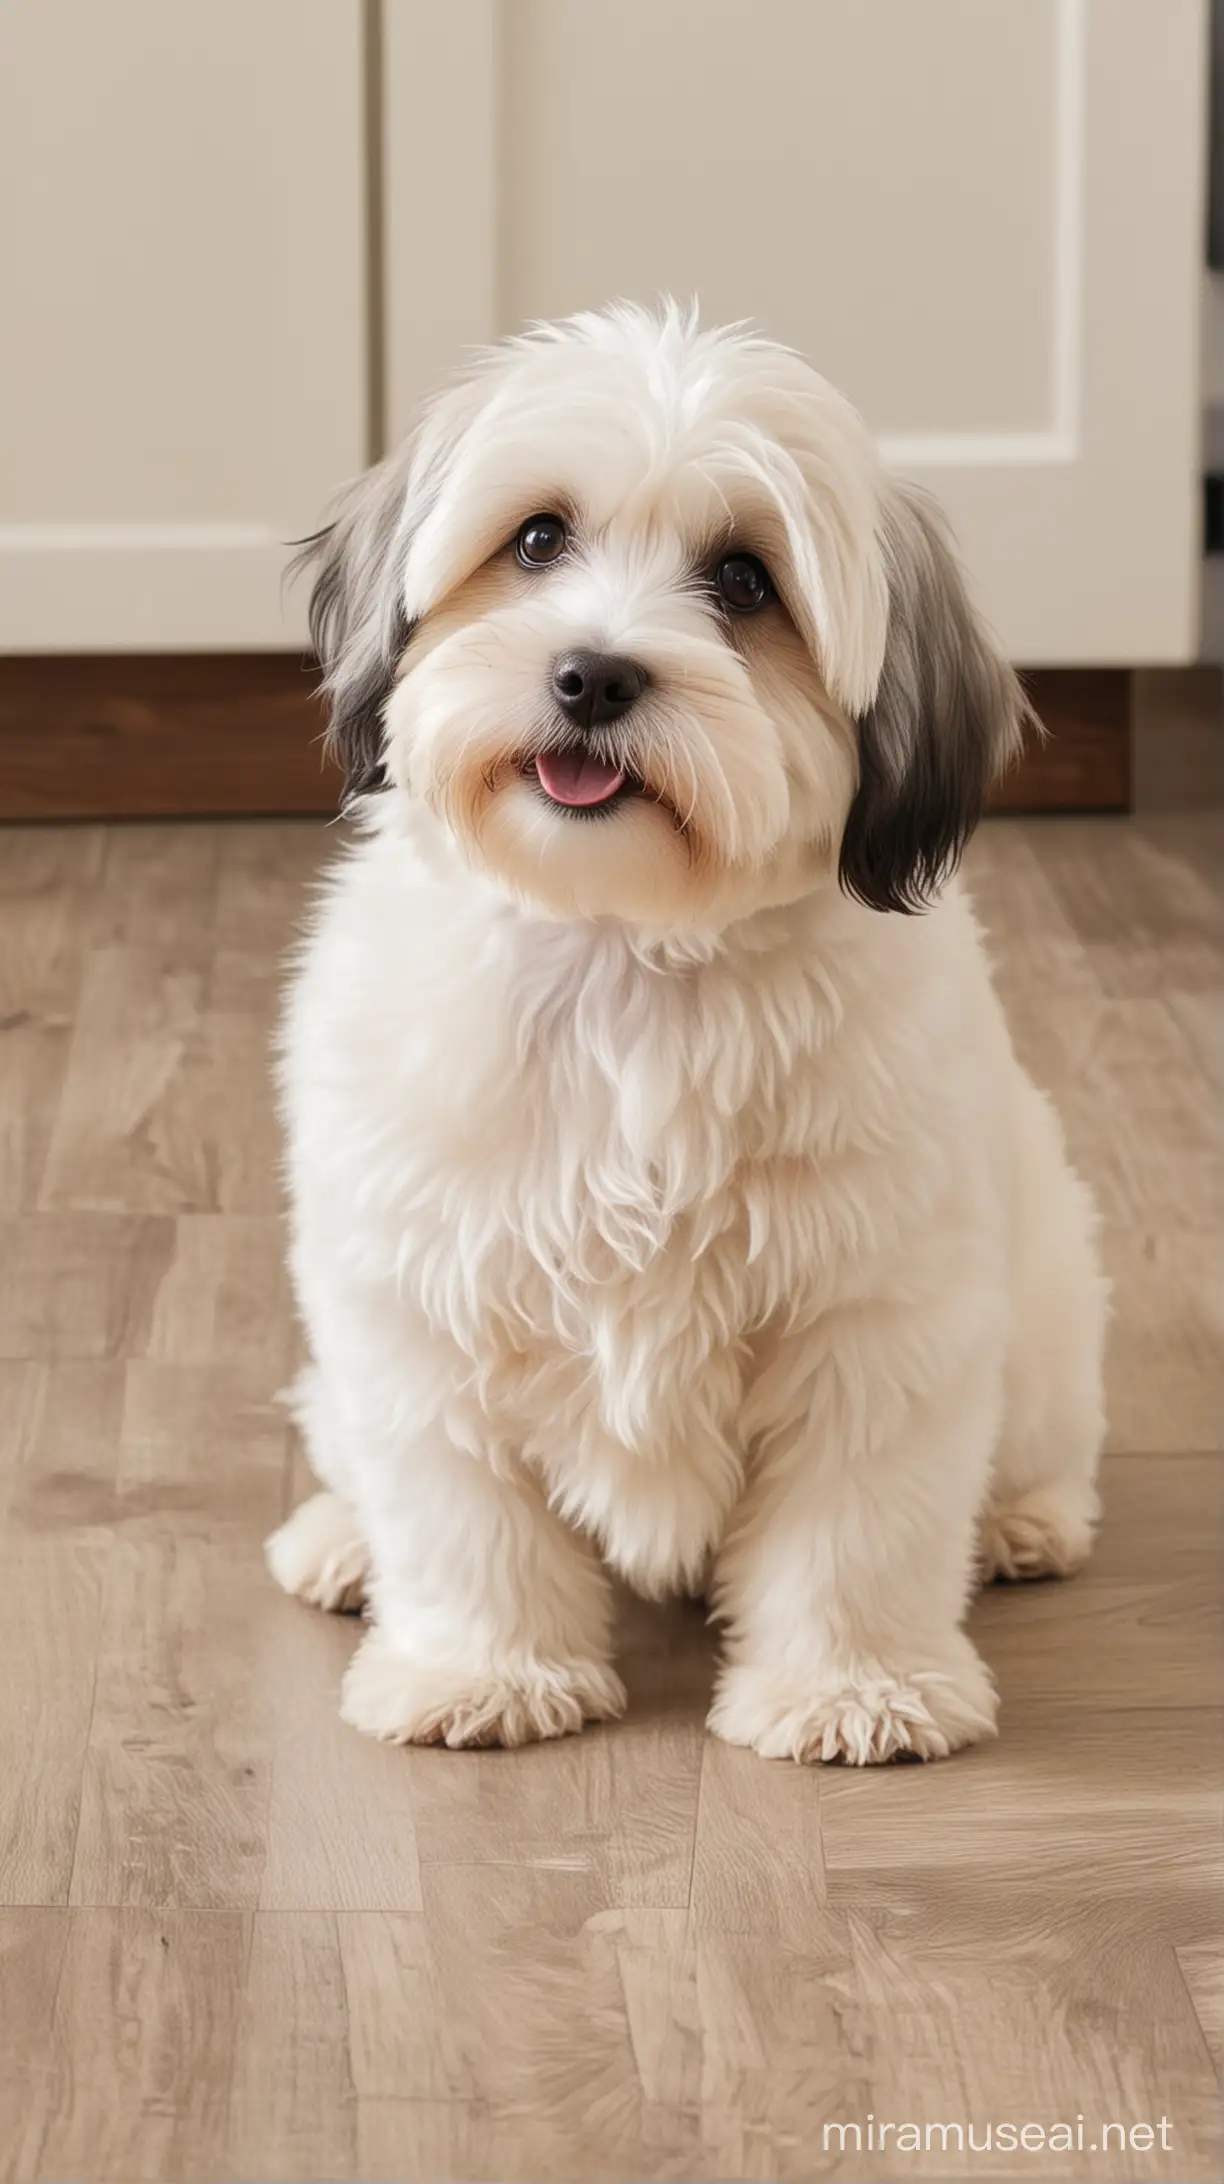 Adorable Havanese Puppy Learning Sit Command from Owner